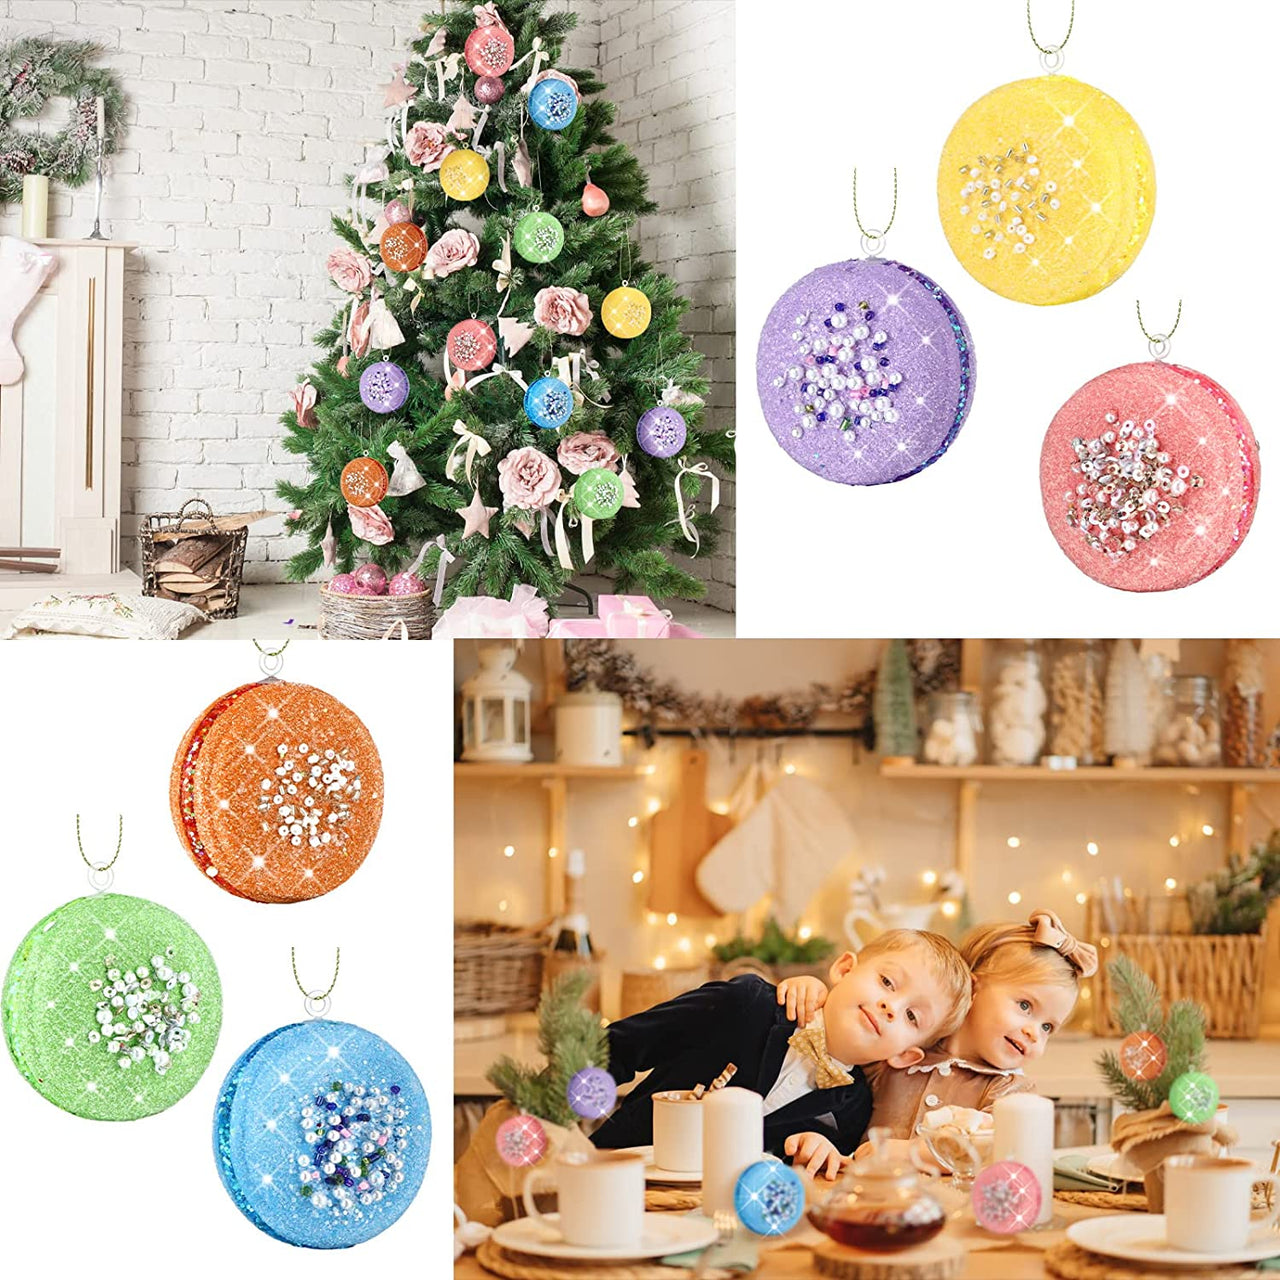 12 Pcs Christmas Tree Ornament Set 3D Glittered Macaron Ornament Colorful Candy Christmas Ornaments Pastel Macaron Decorative Hanging Ornaments with Ropes for Christmas Holiday Candy Party Decorations